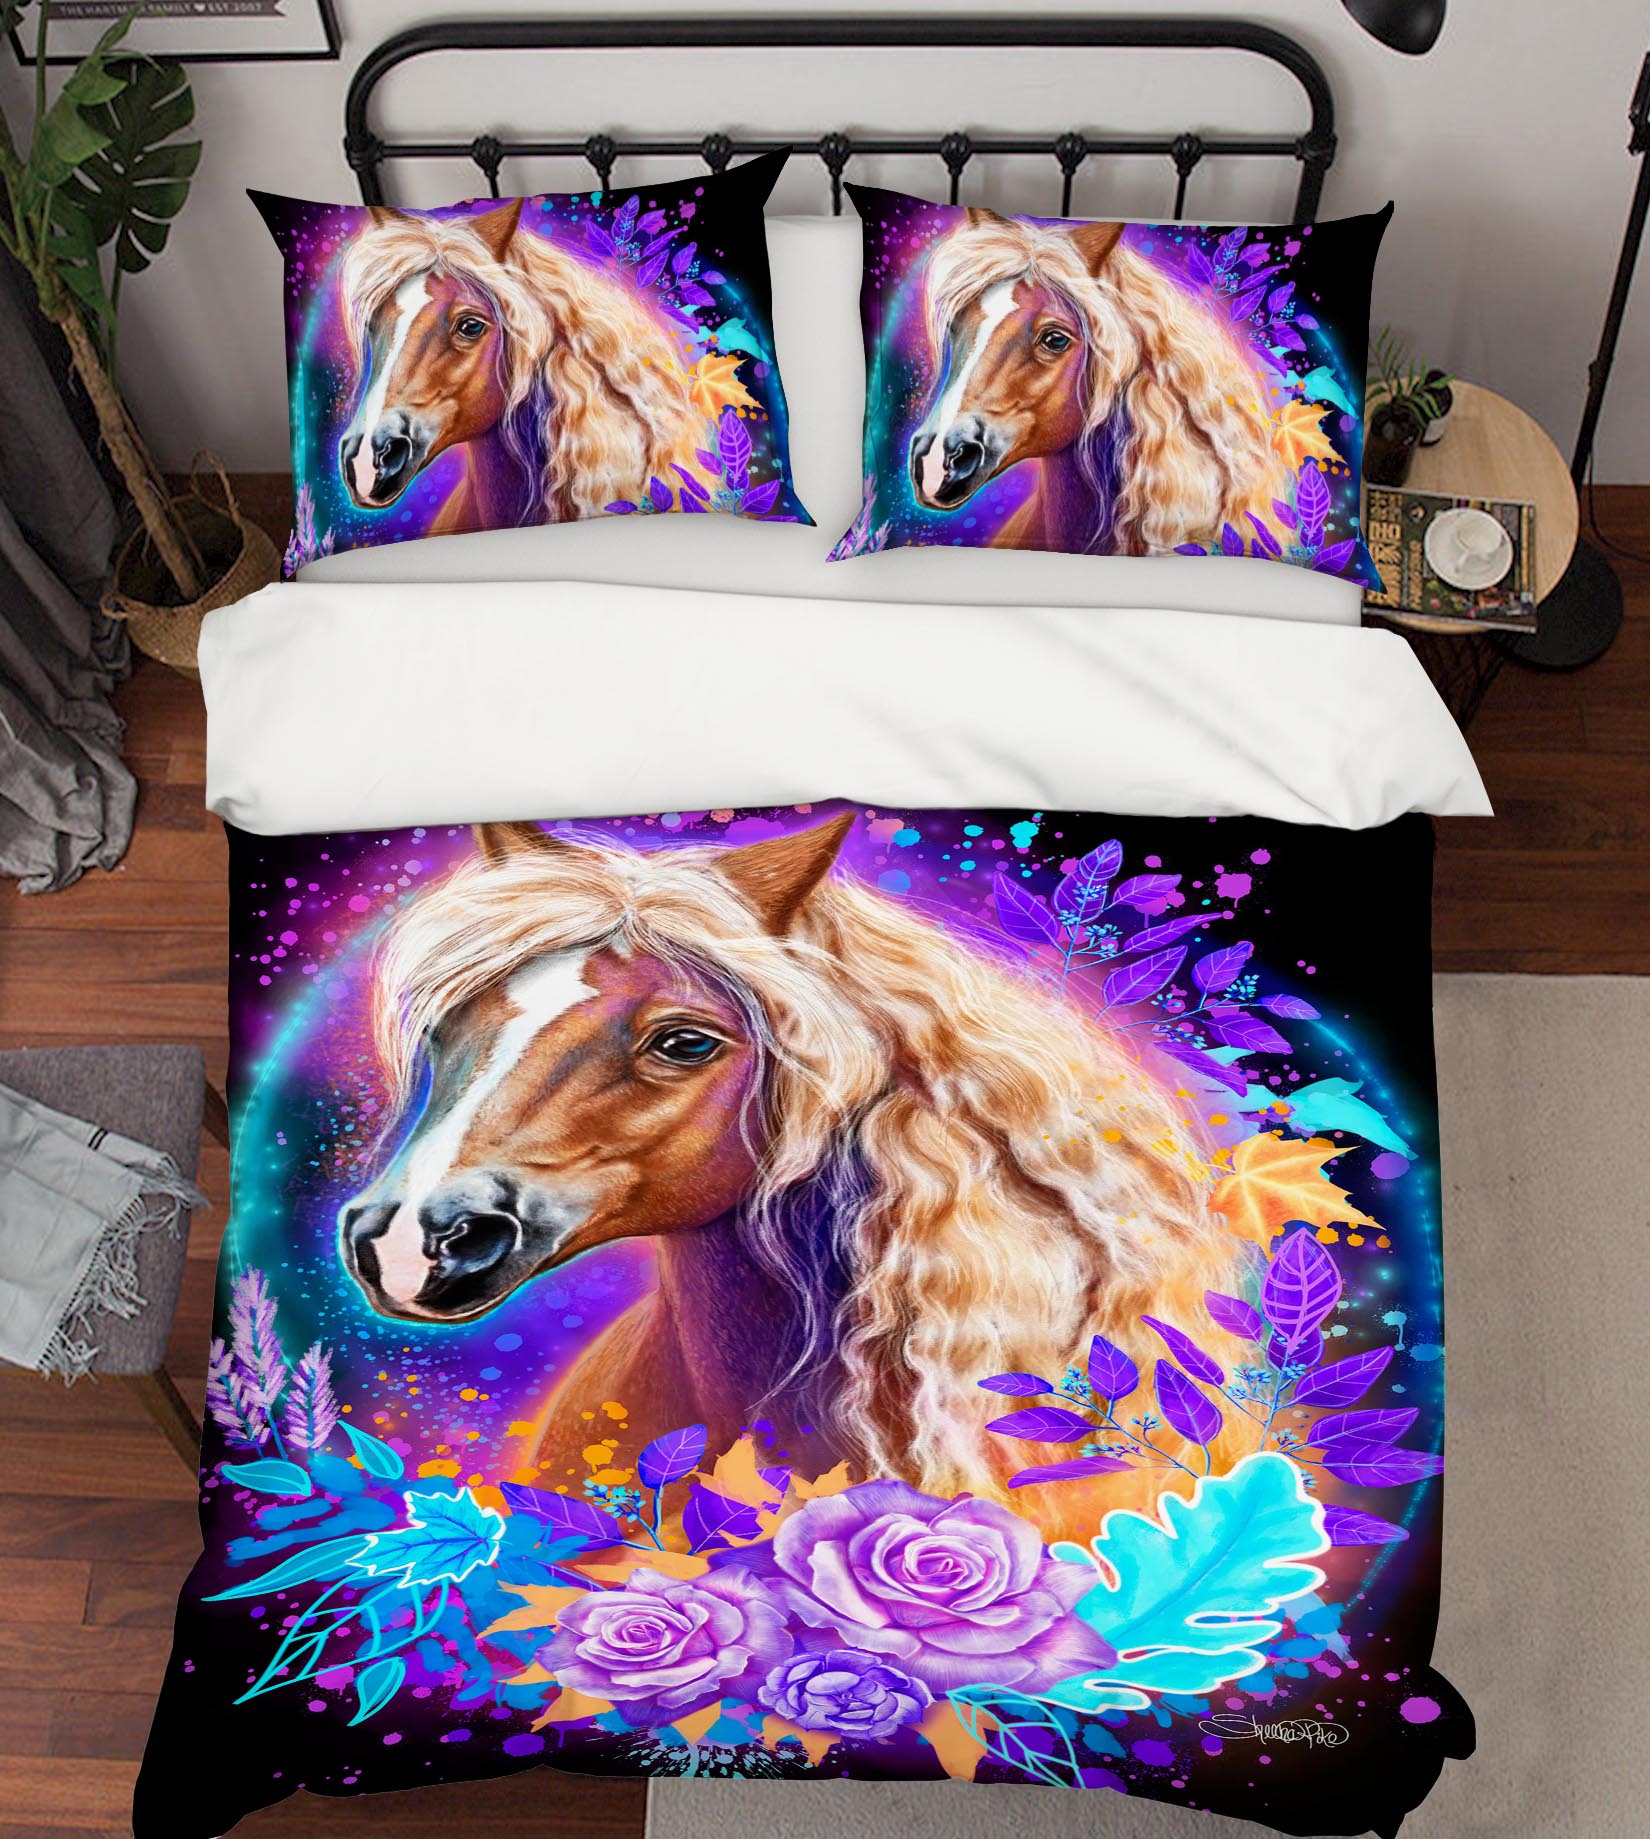 3D Purple Rose Horse 8554 Sheena Pike Bedding Bed Pillowcases Quilt Cover Duvet Cover